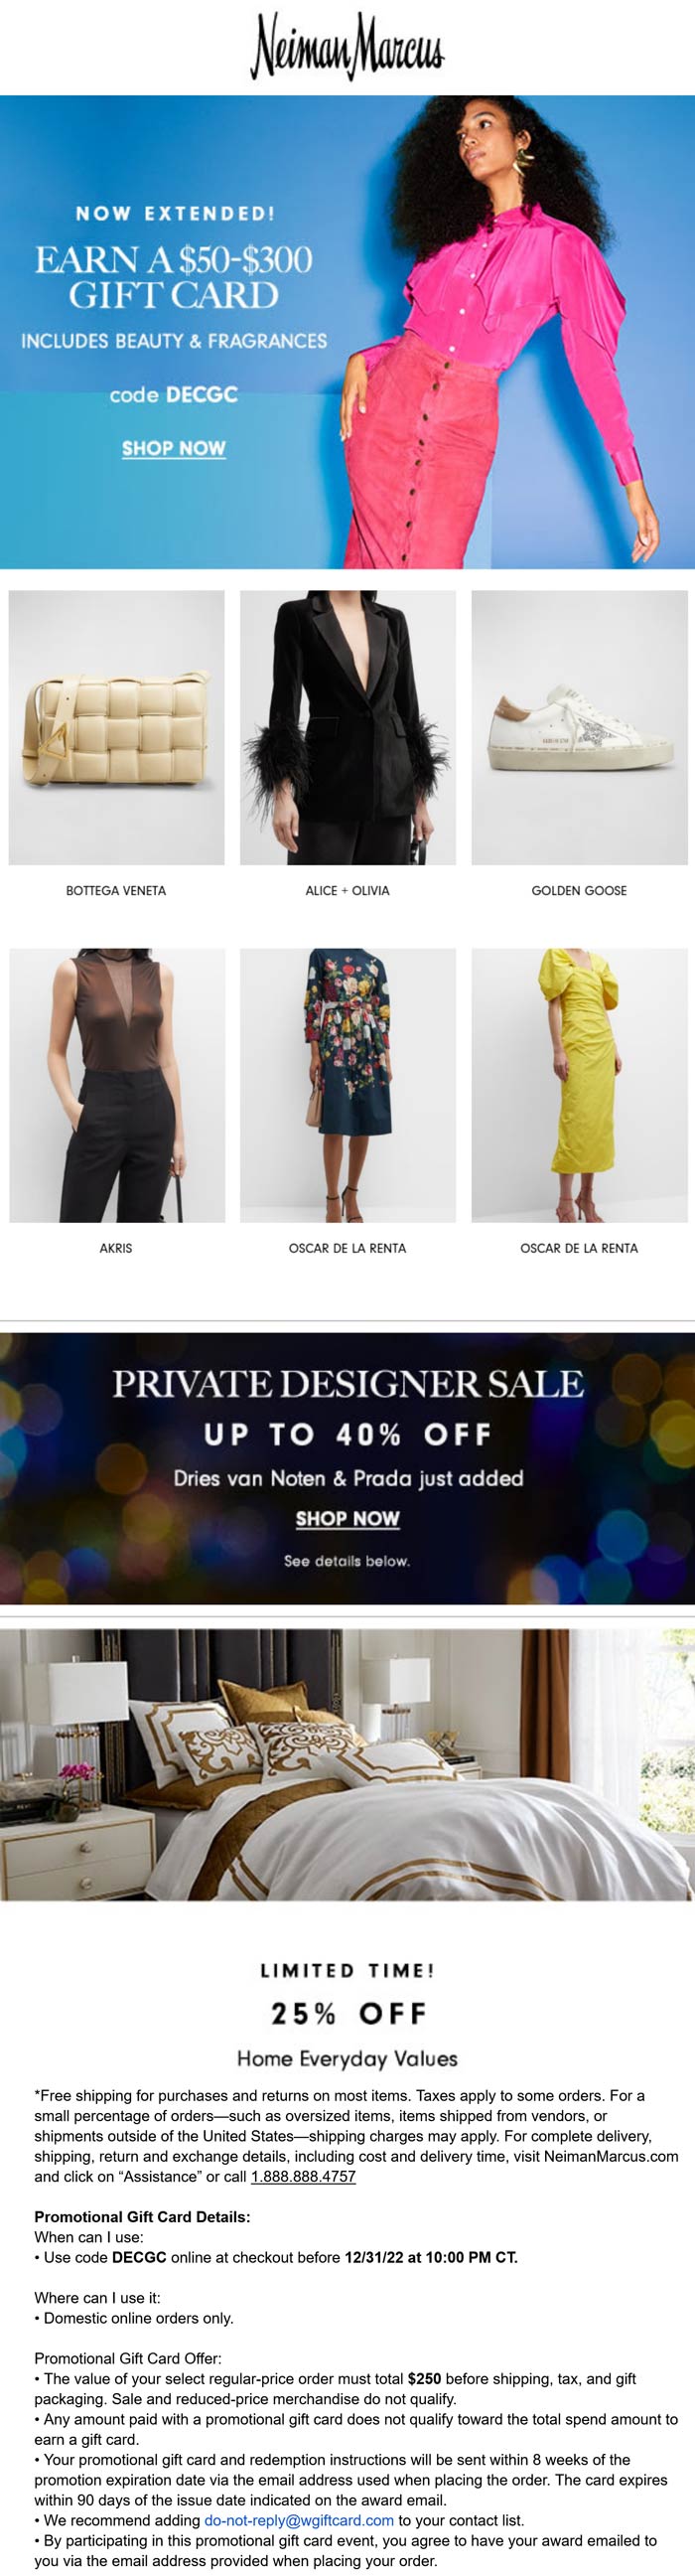 Neiman Marcus stores Coupon  $50-$300 card on $250+ today at Neiman Marcus via promo code DECGC #neimanmarcus 